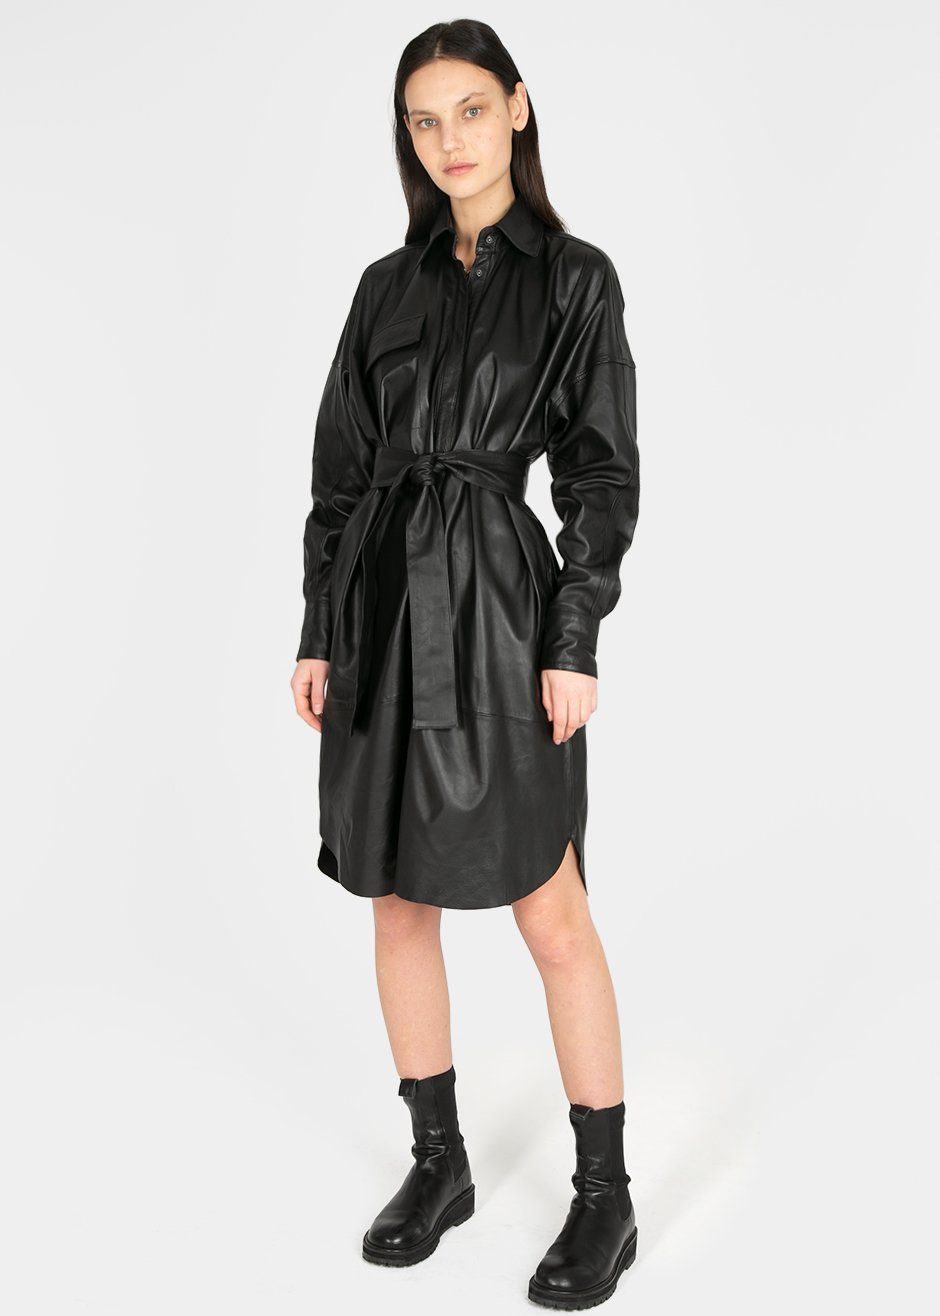 Bologna Belted Leather Shirt Dress by Remain Birger Christensen in Bla ...